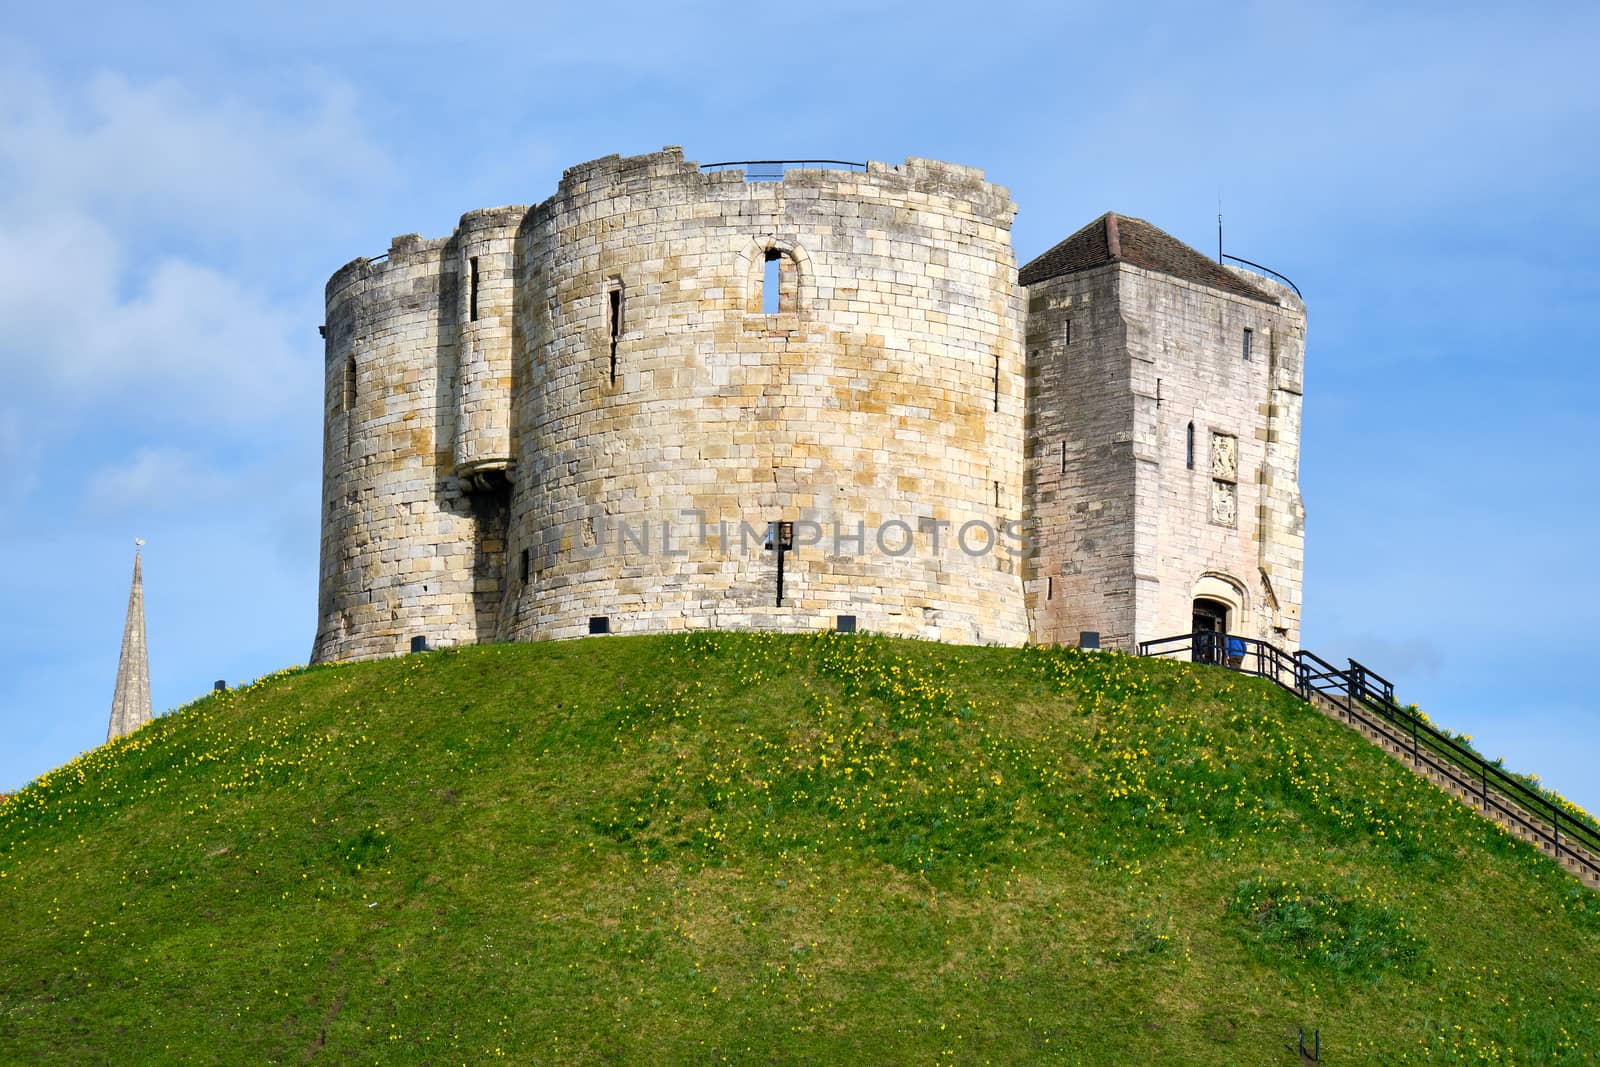 The historic Cliffords Tower in York, Great Britain